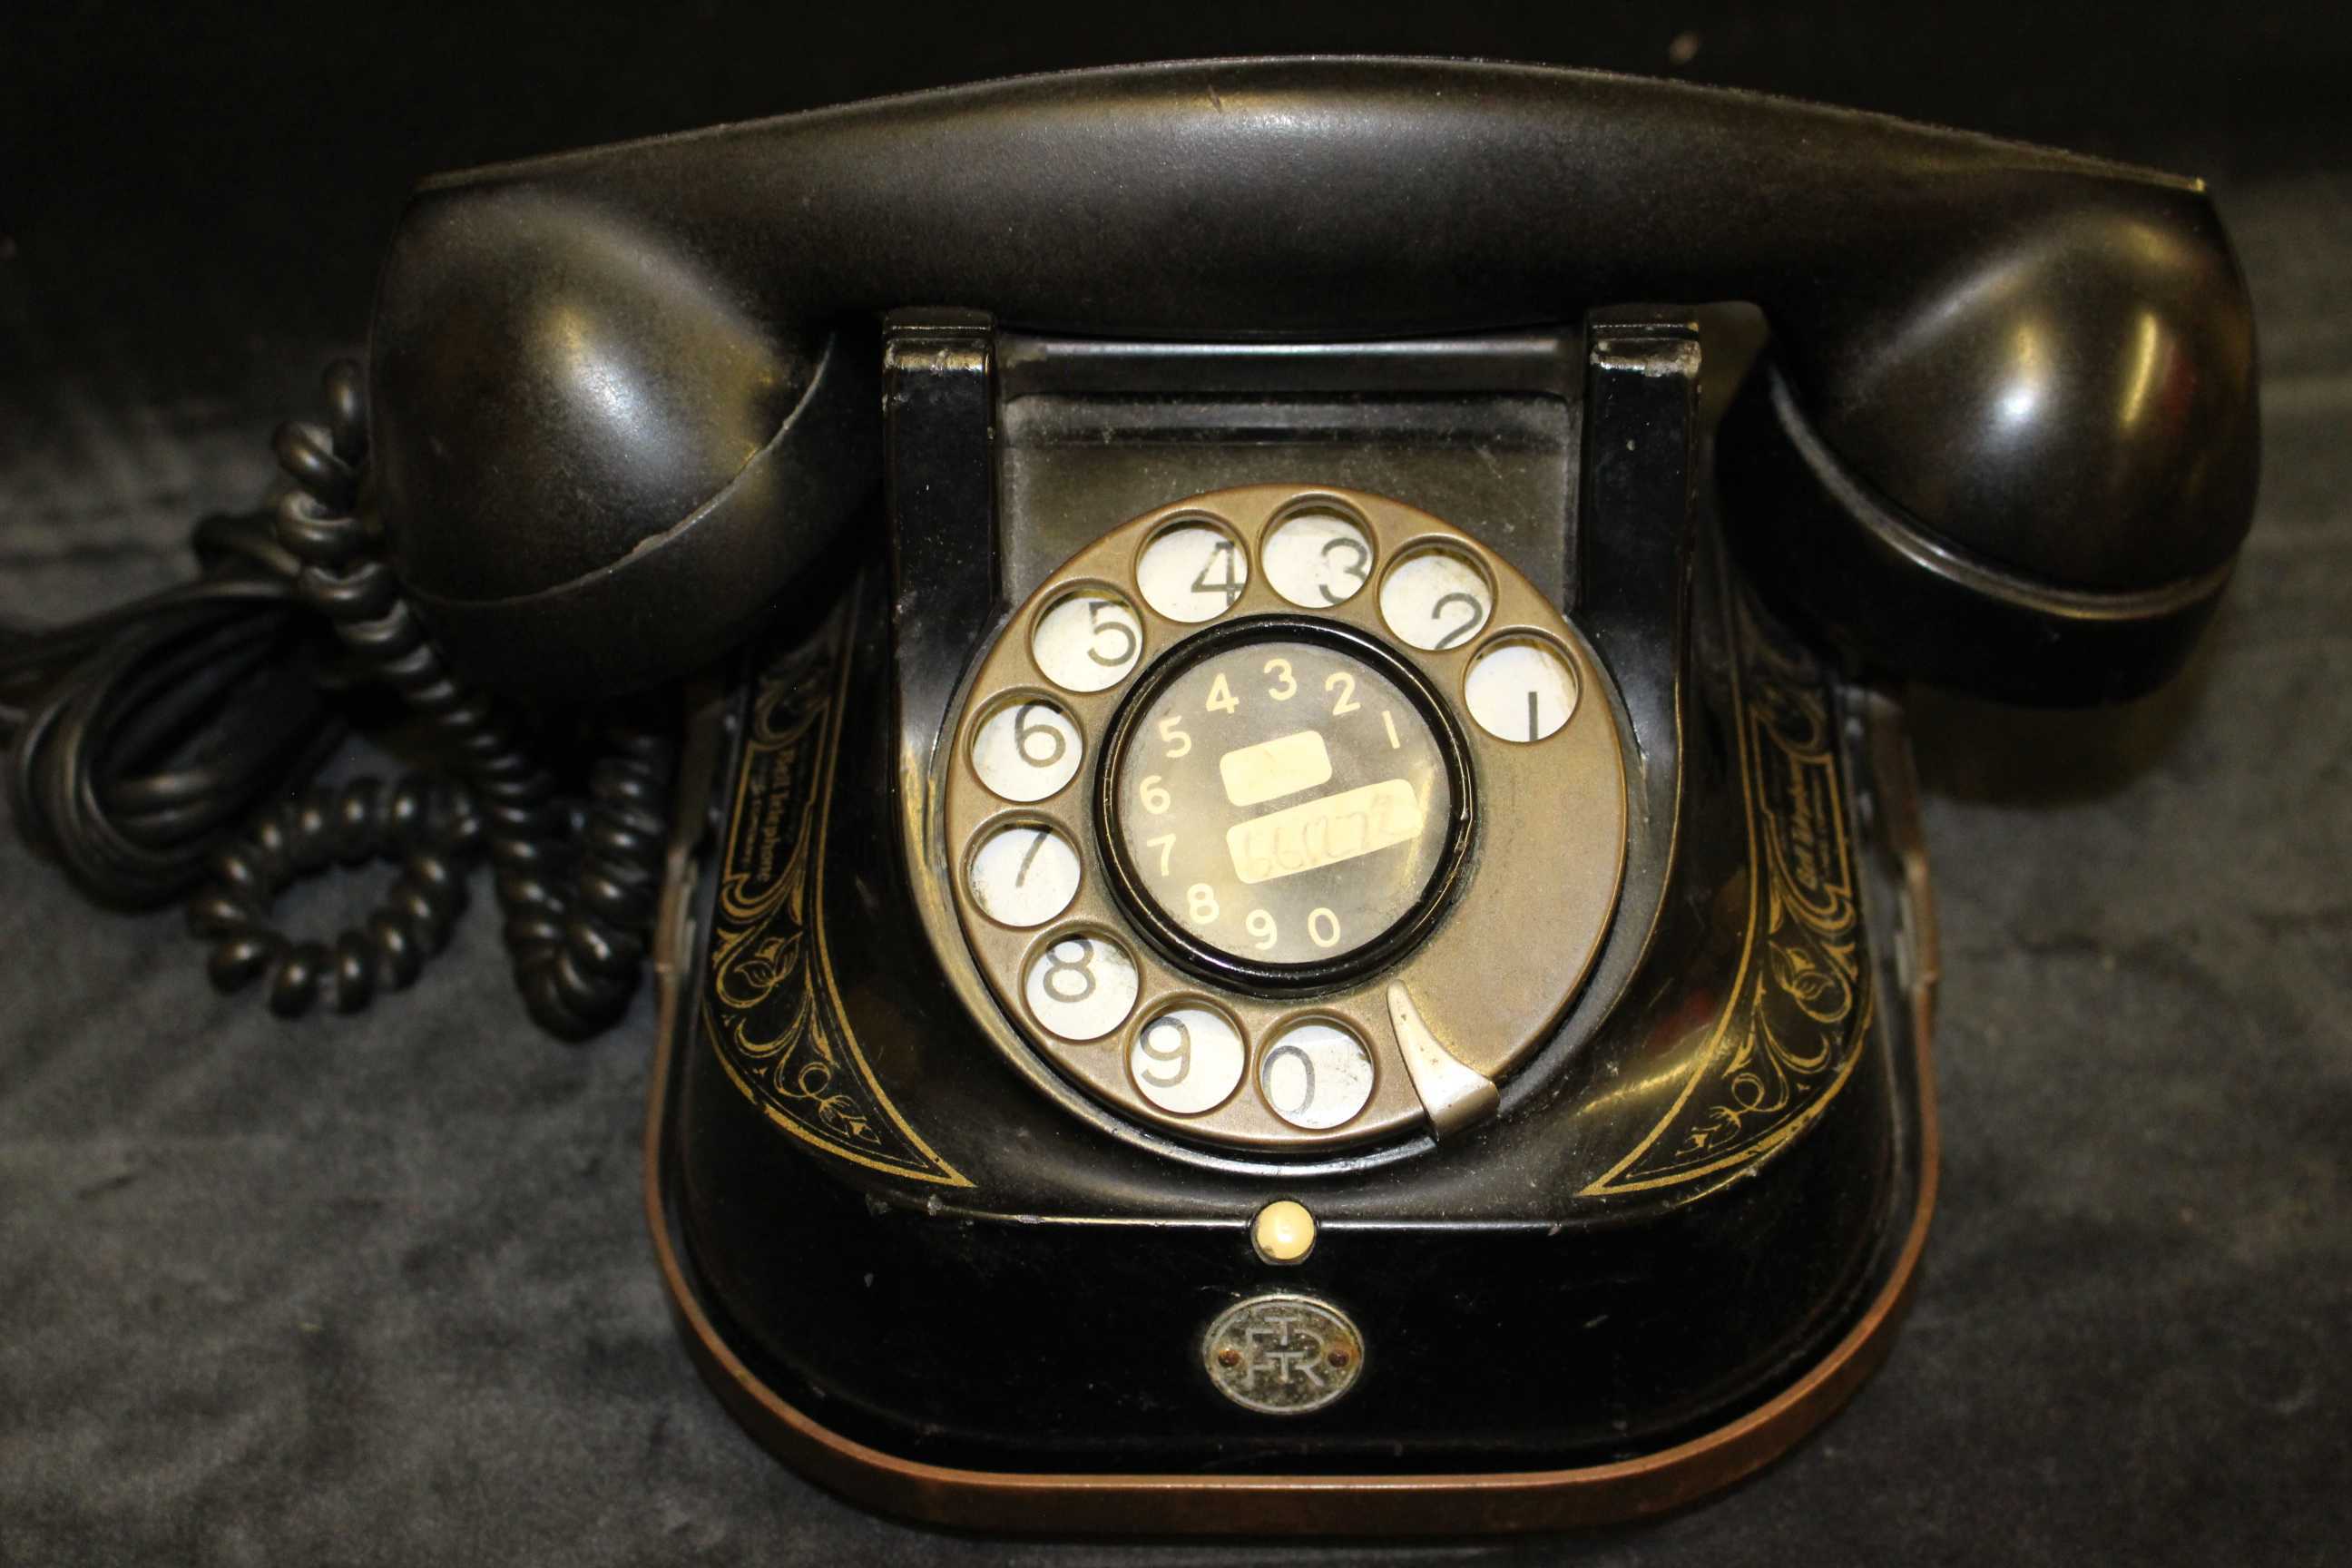 FTR Telephone complete with brass carry handle, looks as though has been converted for modern